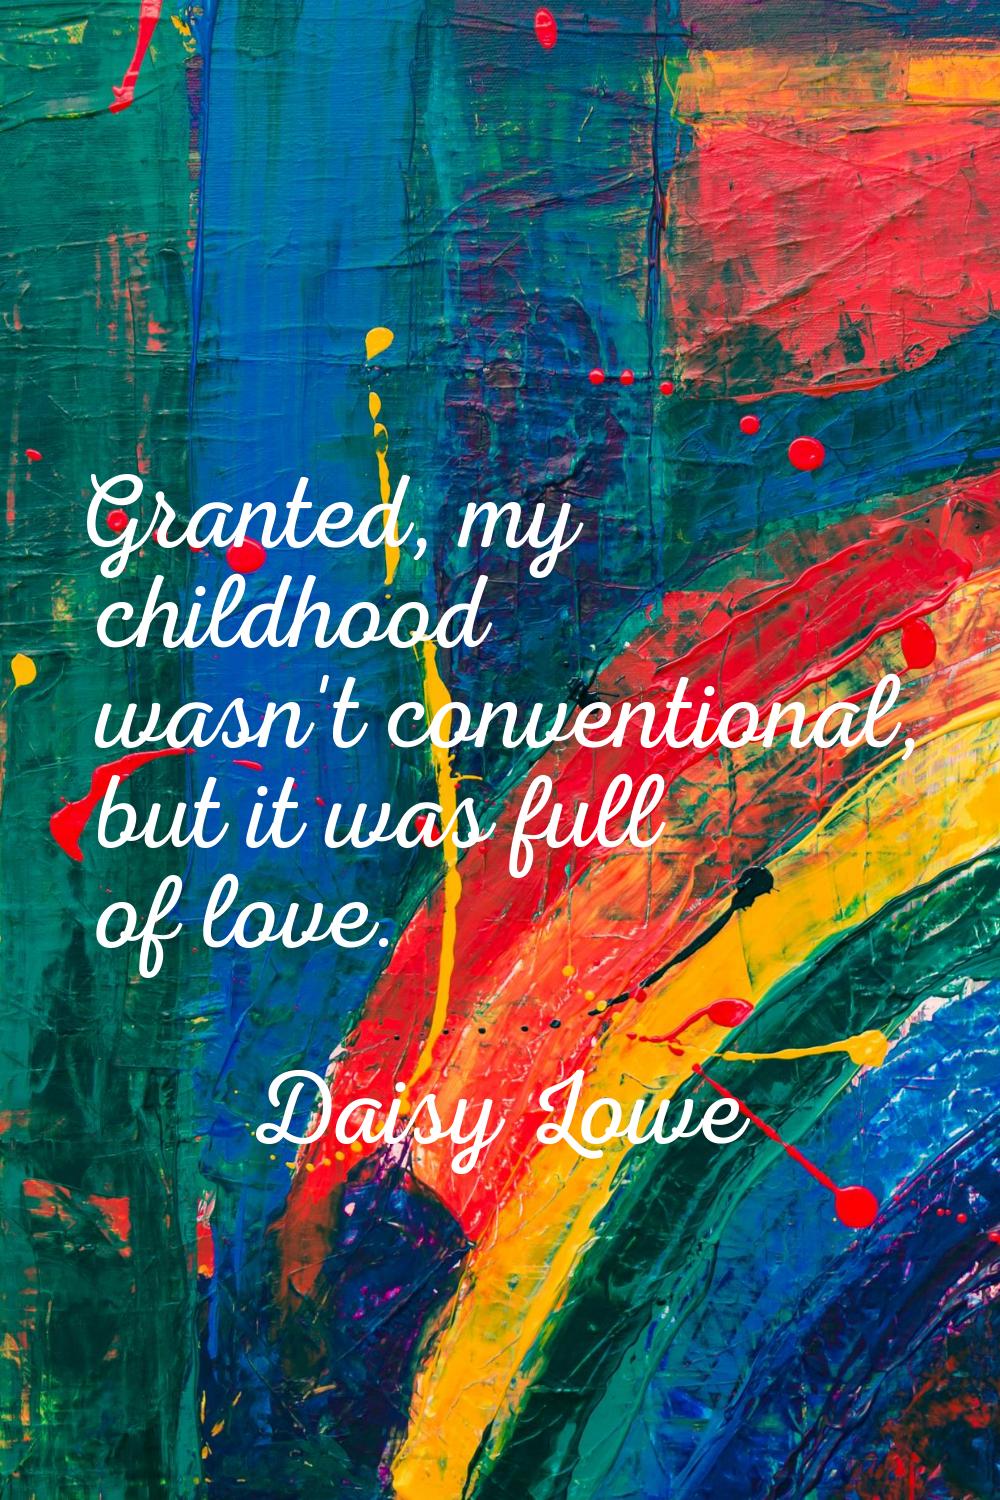 Granted, my childhood wasn't conventional, but it was full of love.